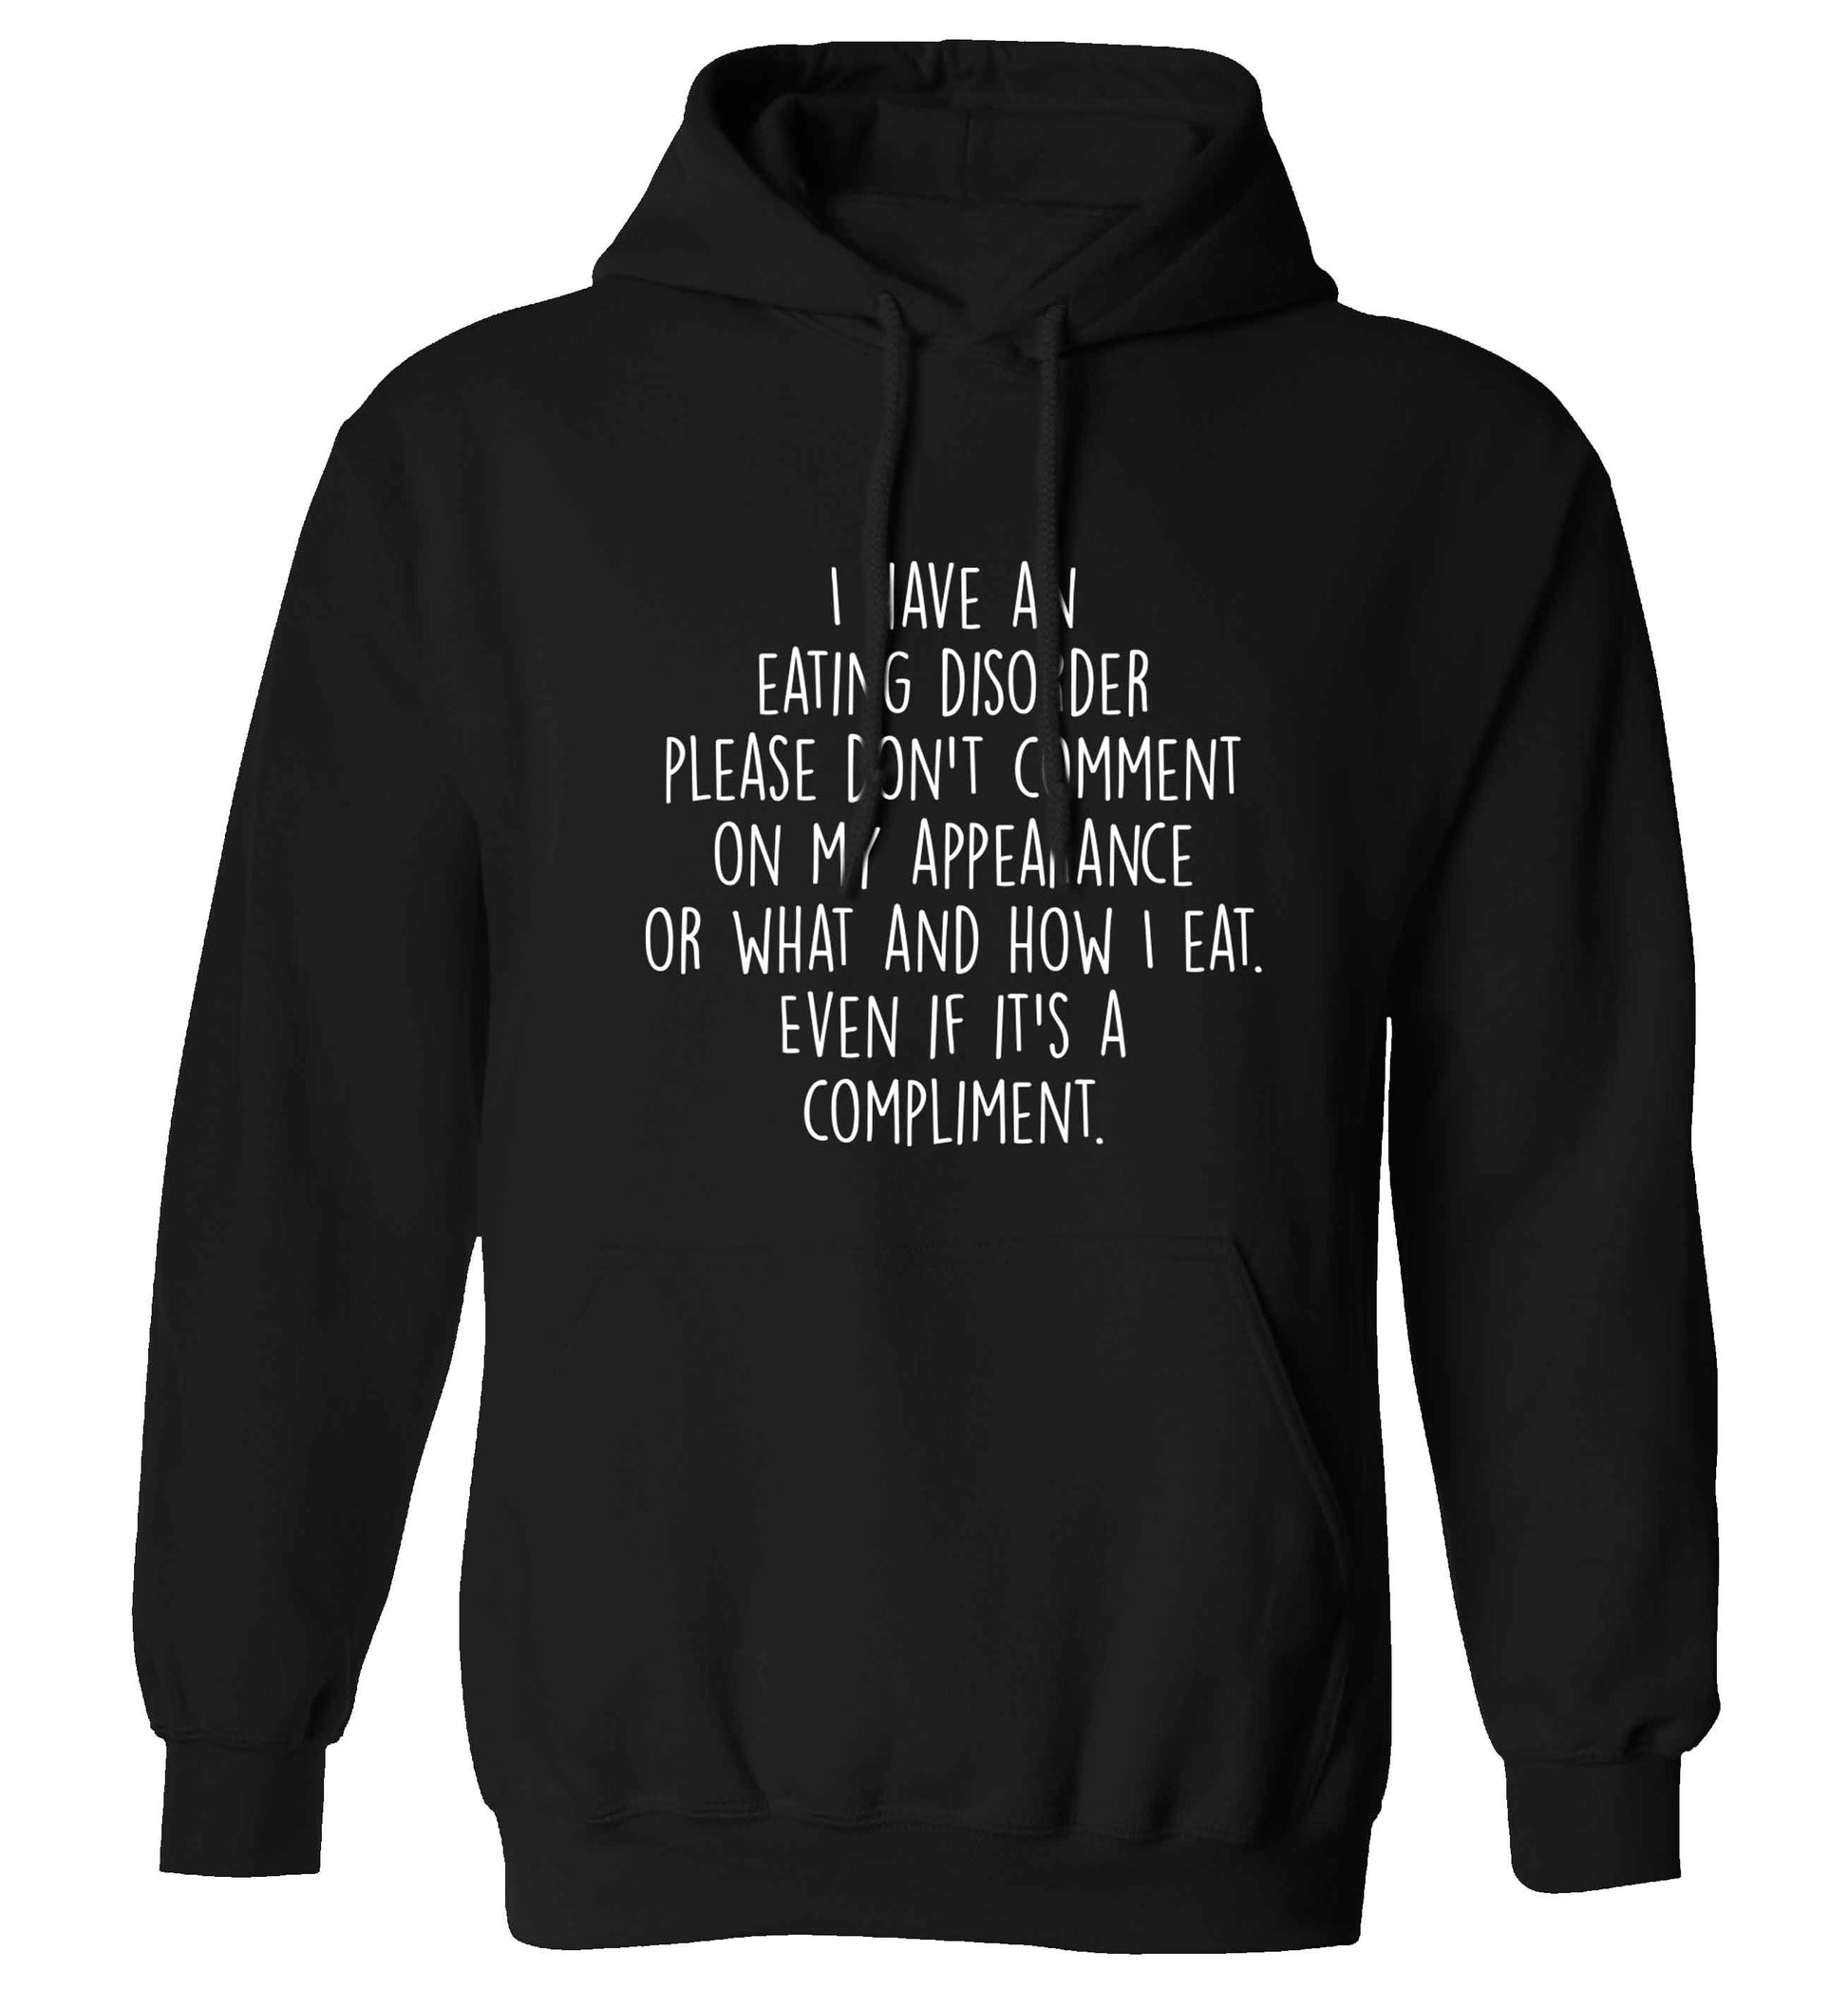 I have an eating disorder please don't comment on my appearance or what and how I eat. Even if it's a compliment adults unisex black hoodie 2XL